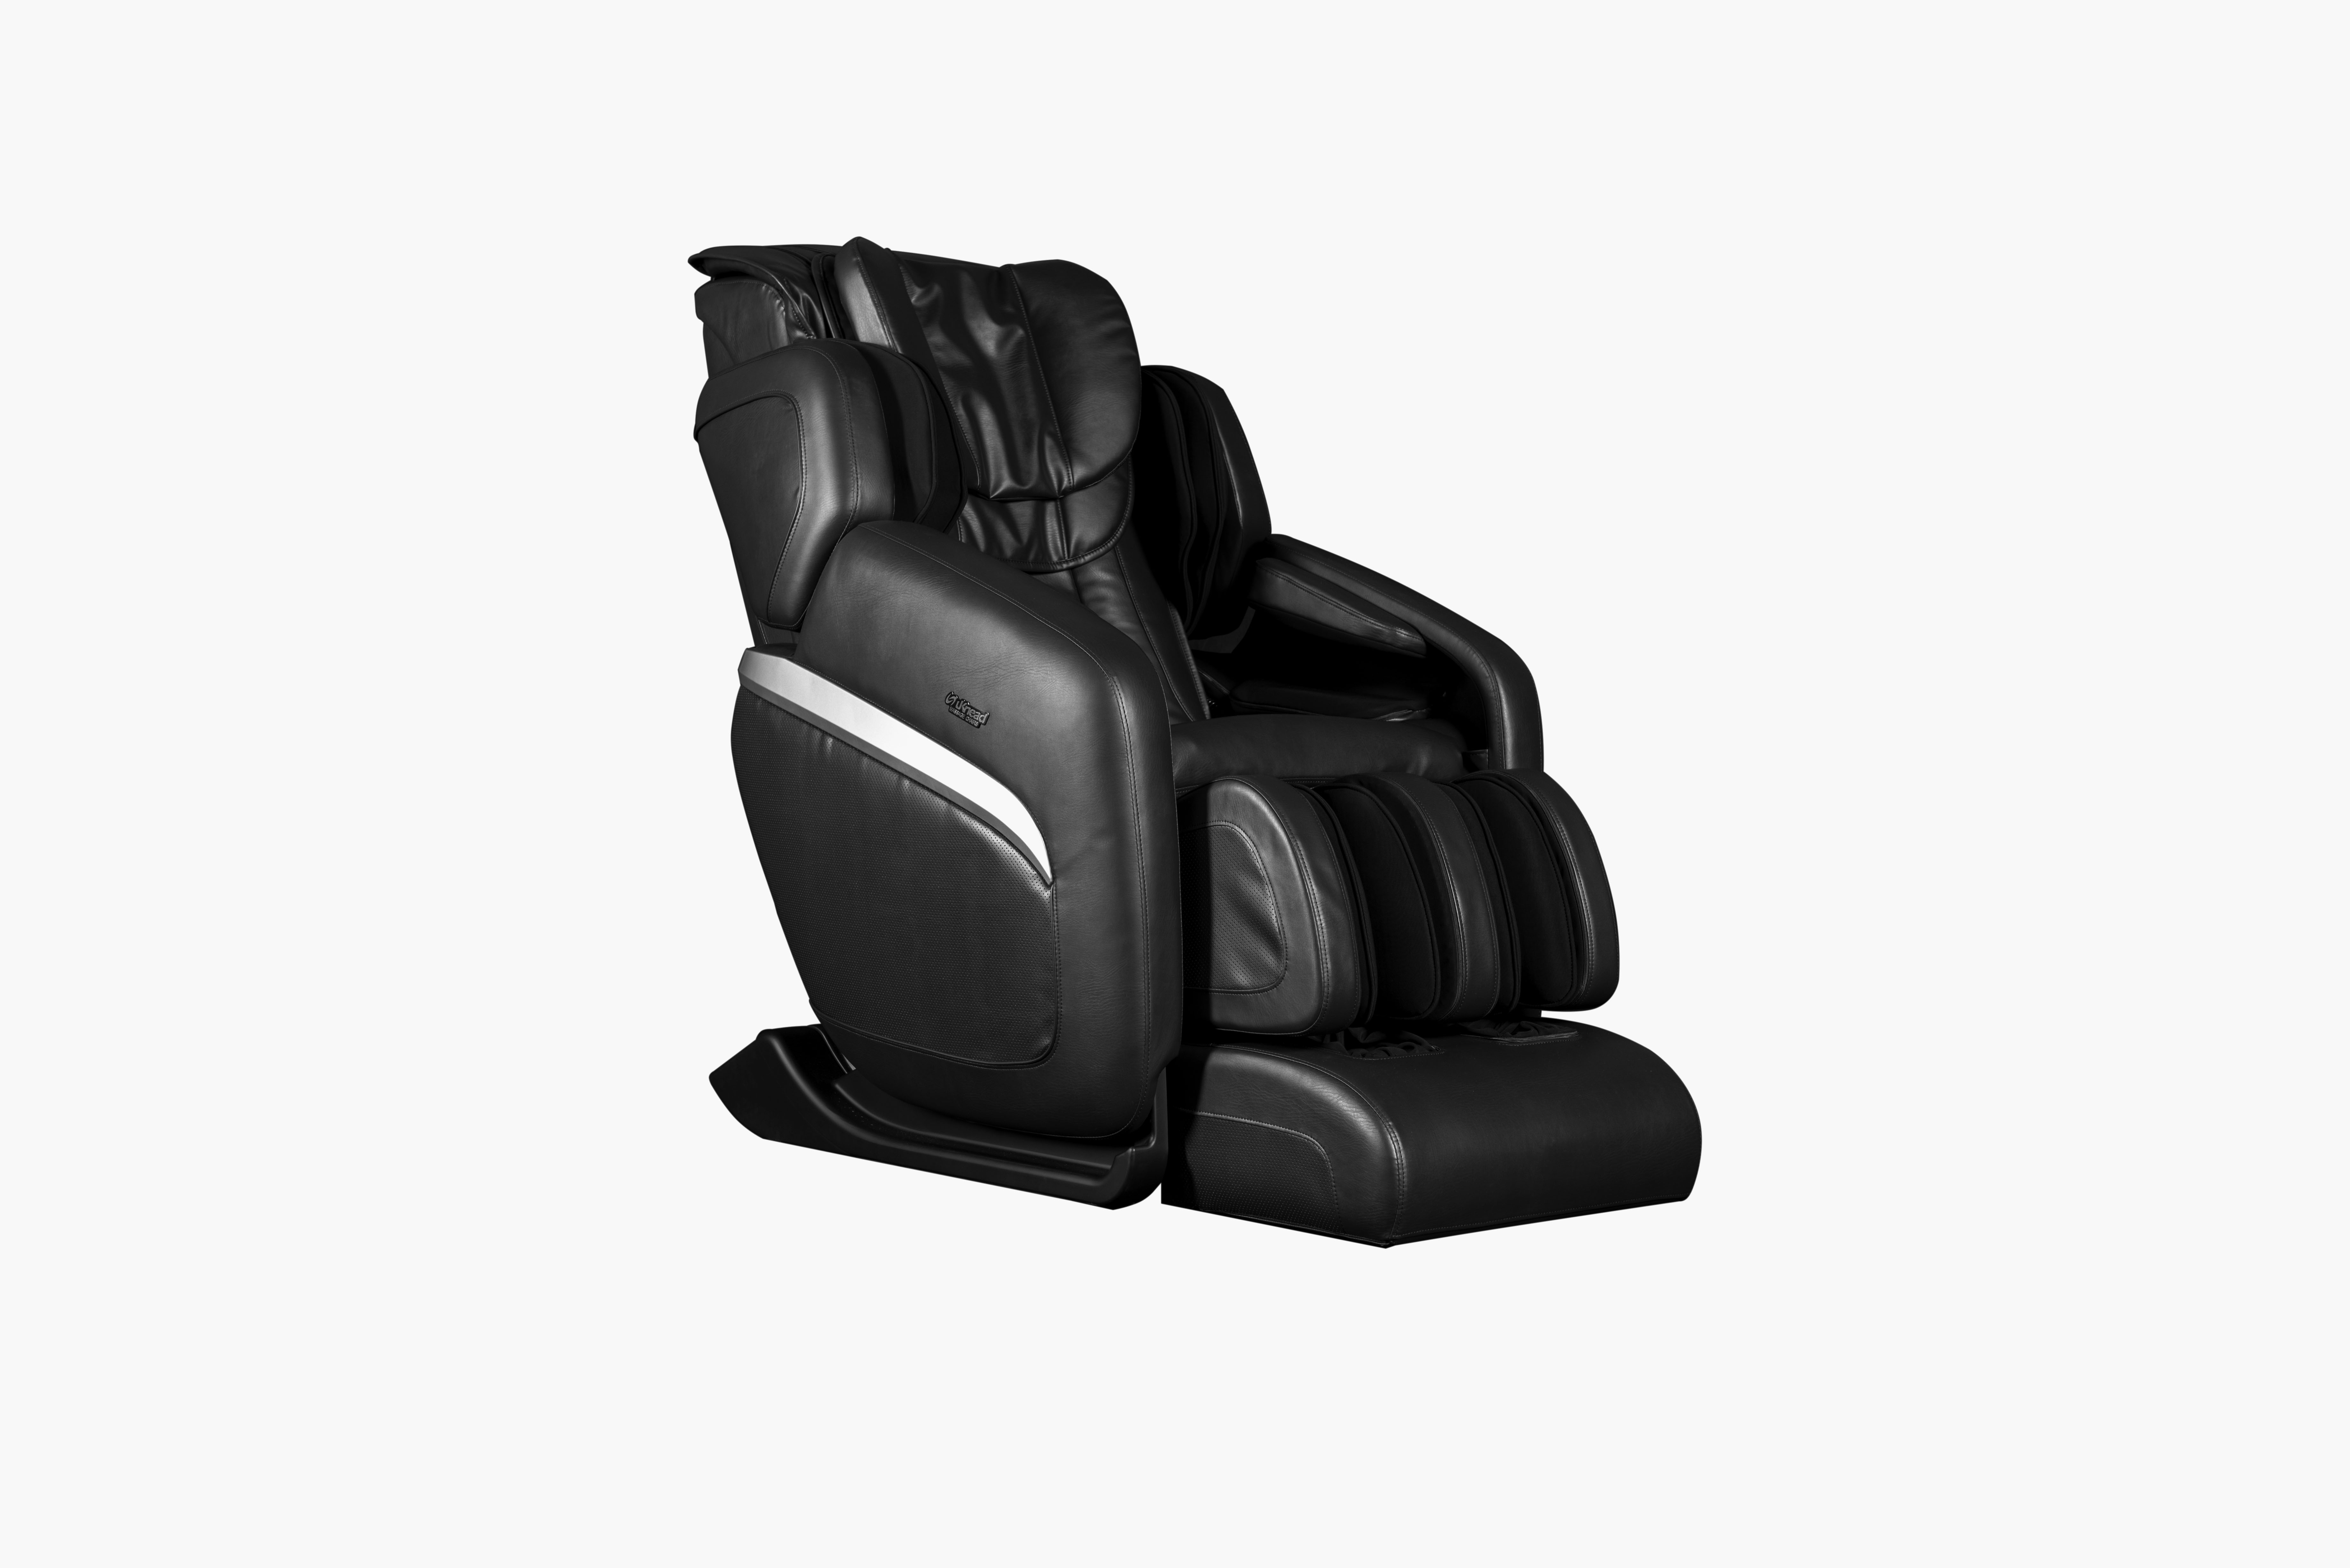 Lavita Massage Chair Shop For Affordable Home Furniture Decor Outdoors And More